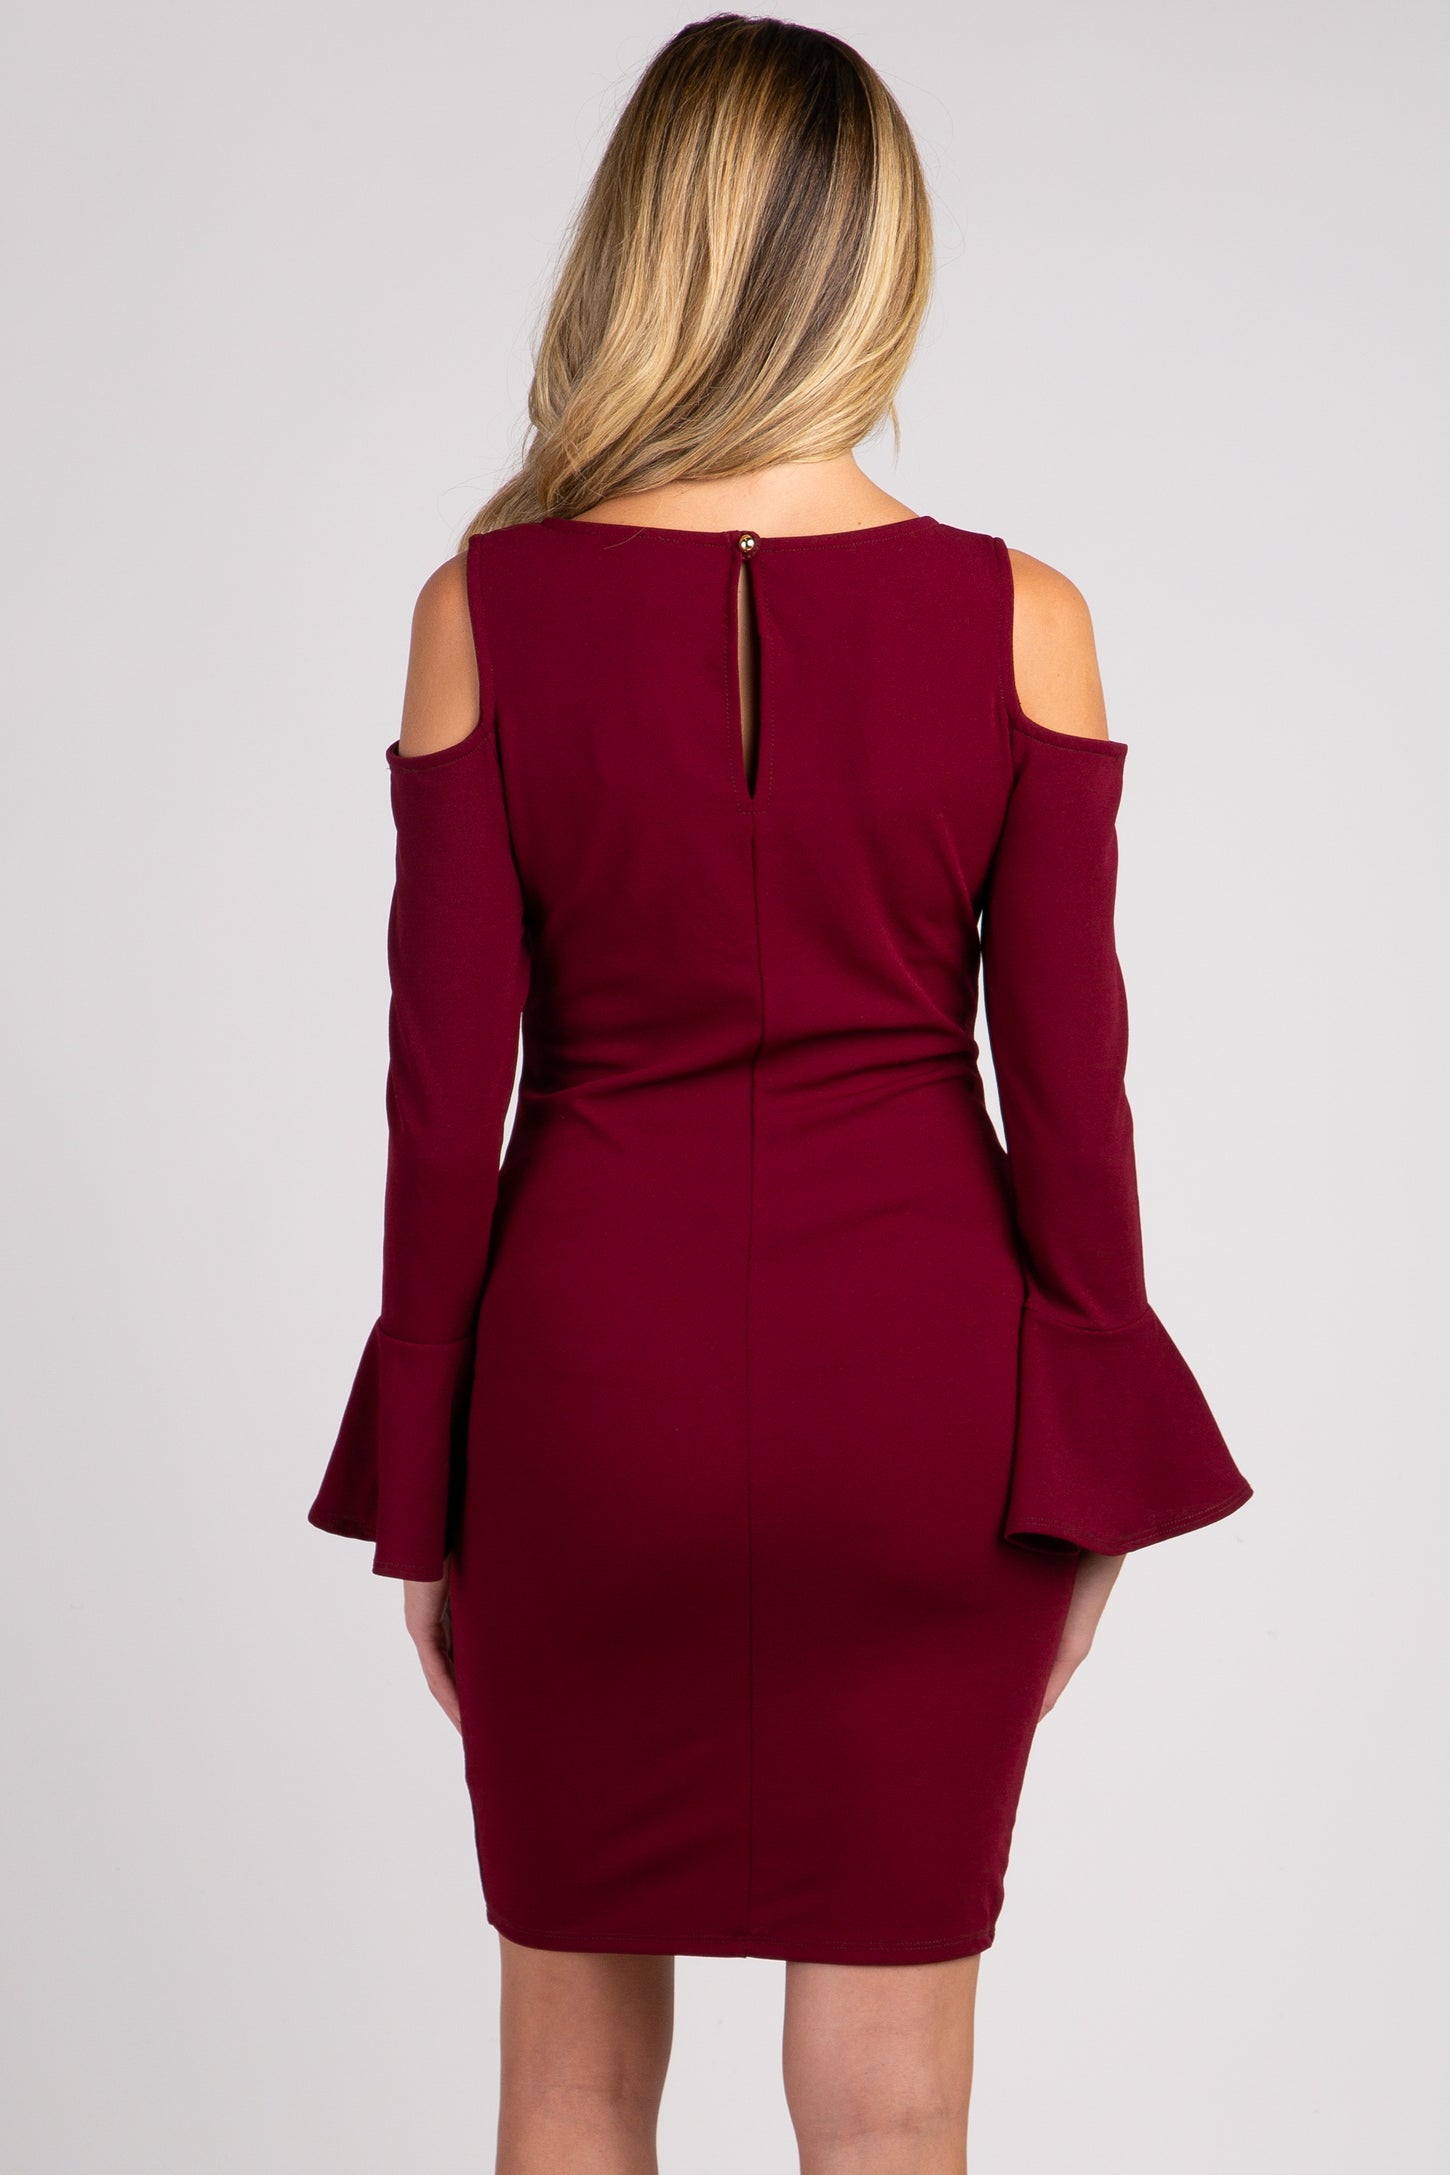 PinkBlush Burgundy Cold Shoulder Bell Sleeve Fitted Maternity Dress